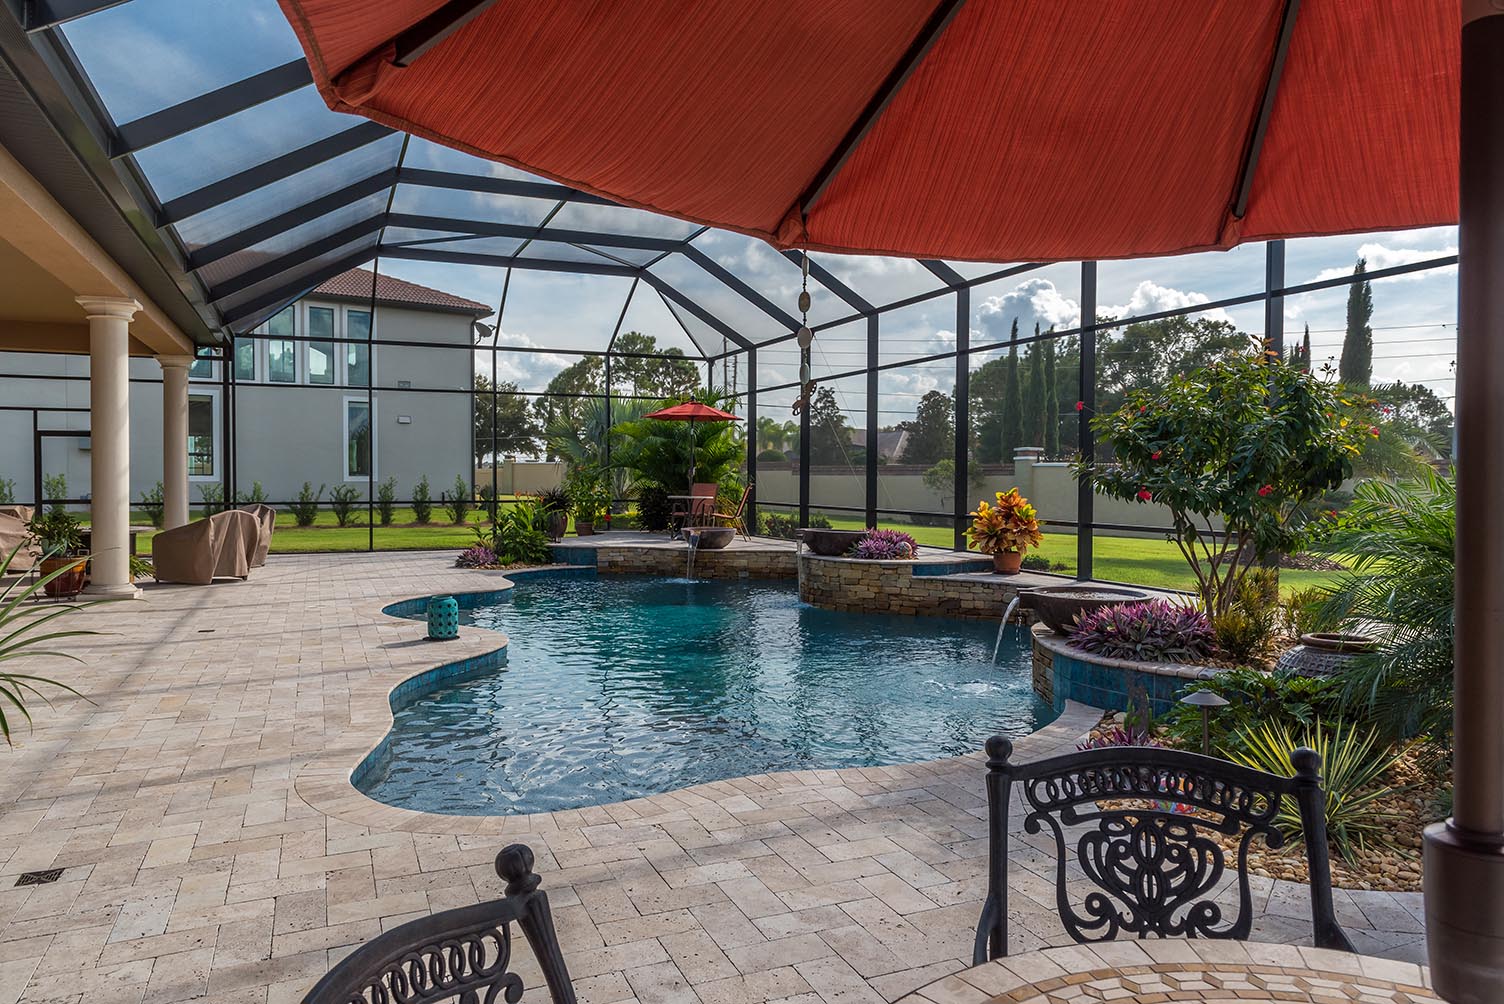 Pools and Spas Gallery - Pools by Bradley Lake Mary, FL